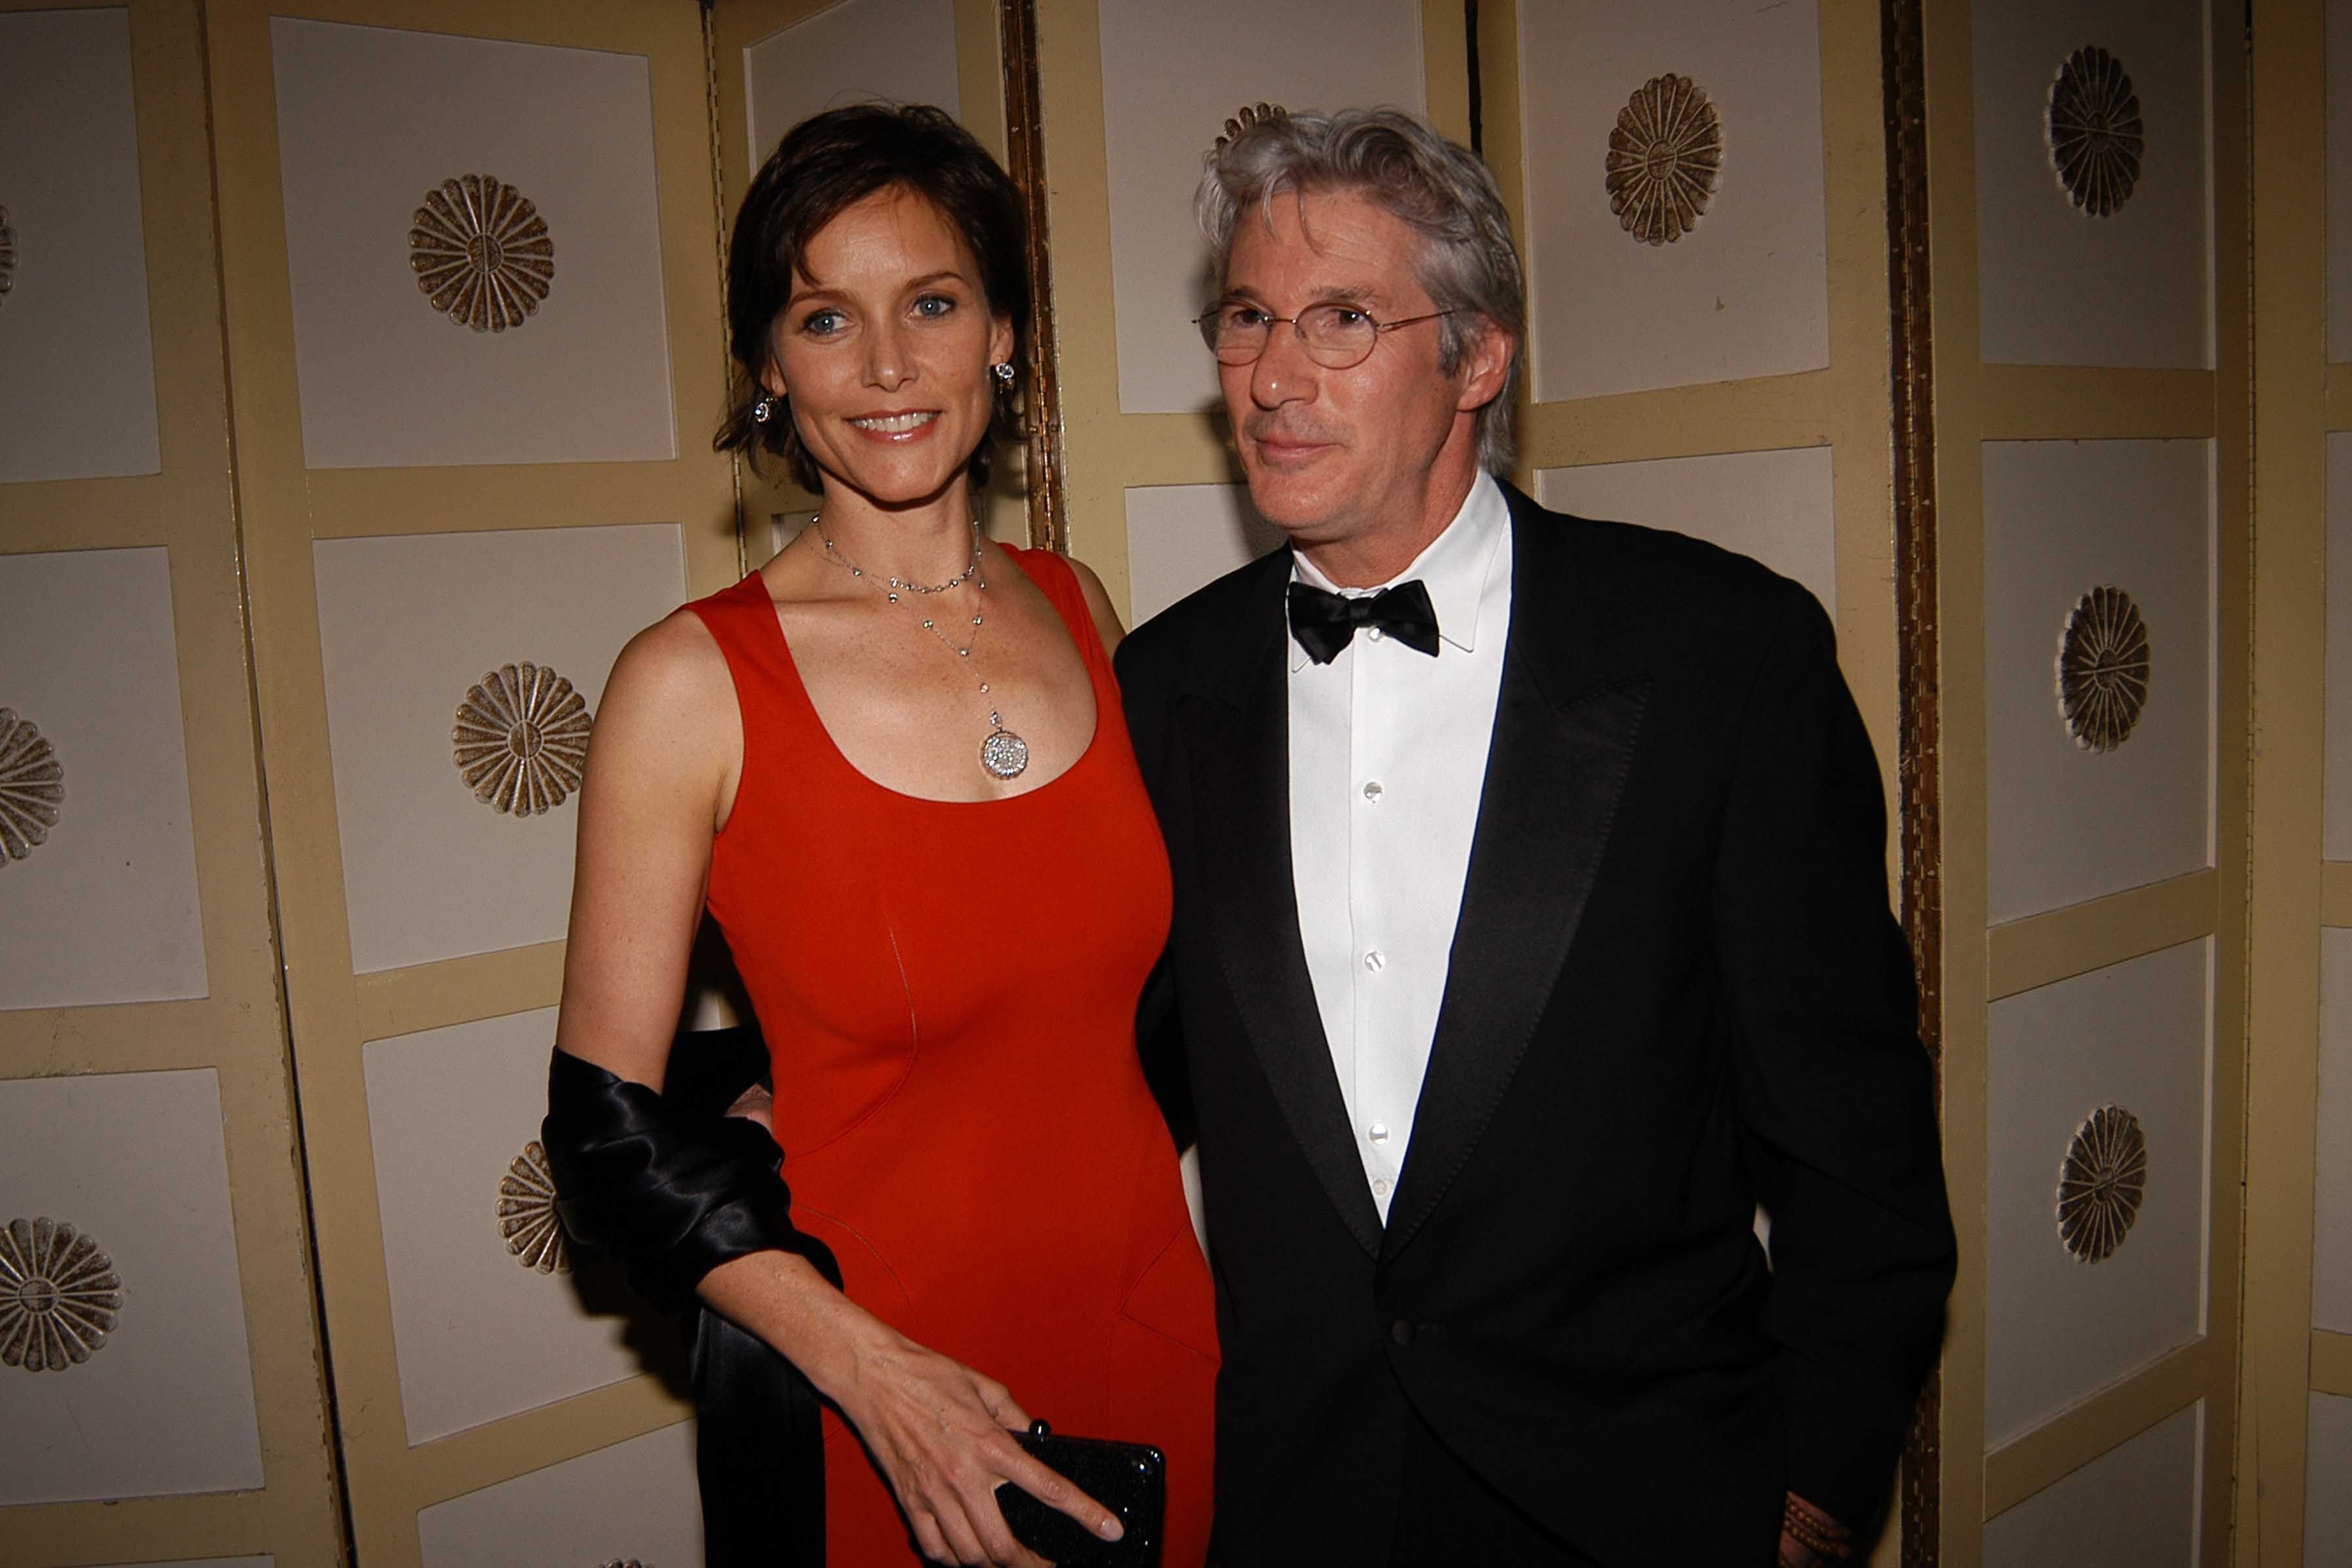 Carey Lowell and Richard Gere during The Eighth Red Ball at Pierre Hotel on February 7, 2005 in New York City. | Source: Getty Images